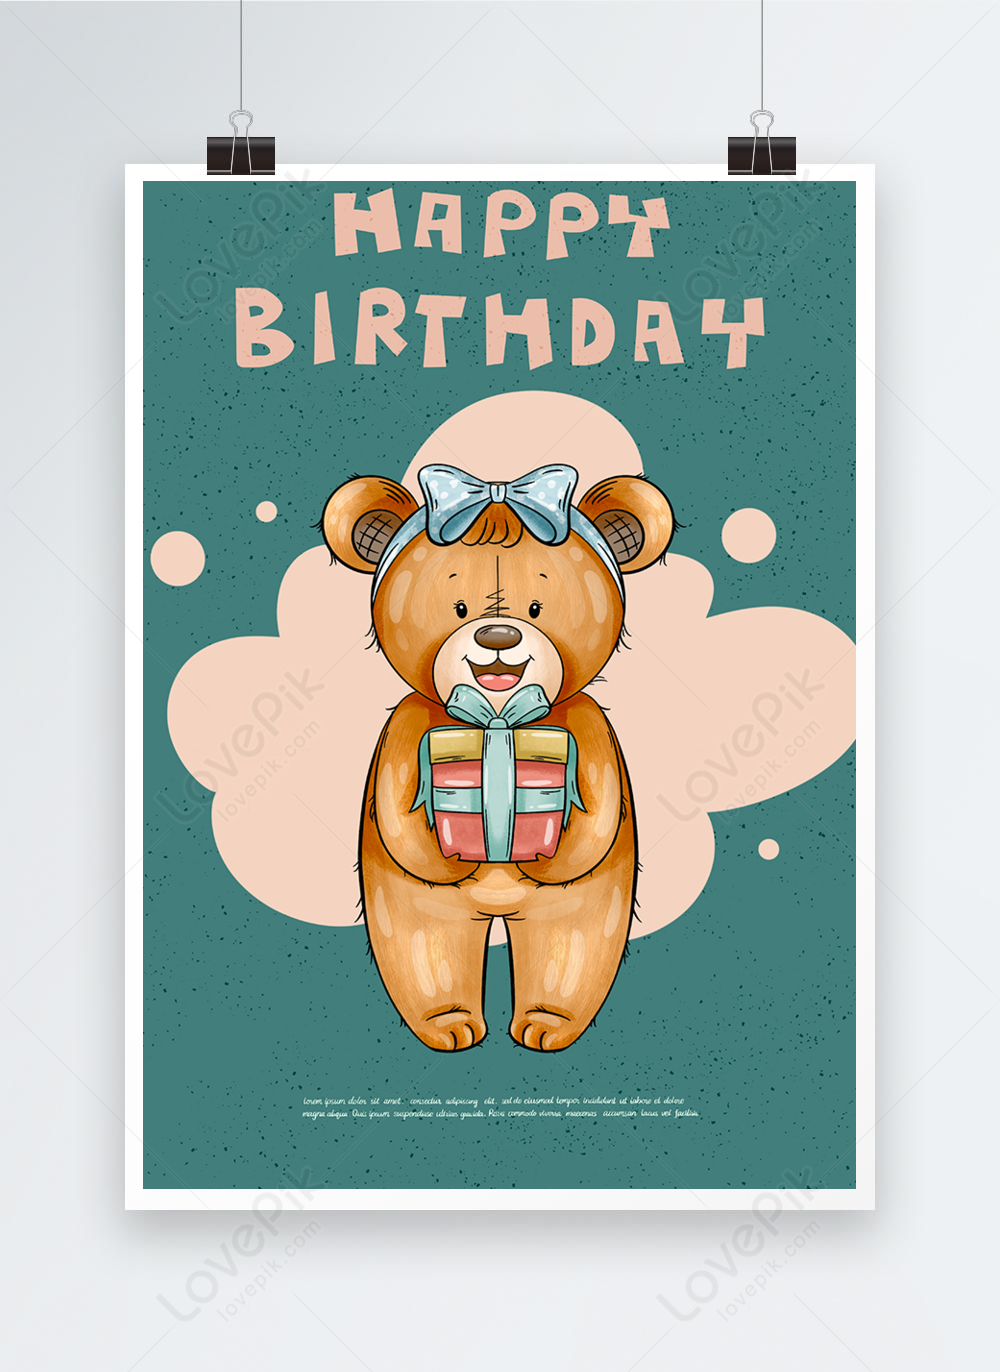 Cartoon style bear birthday party poster template image_picture free ...